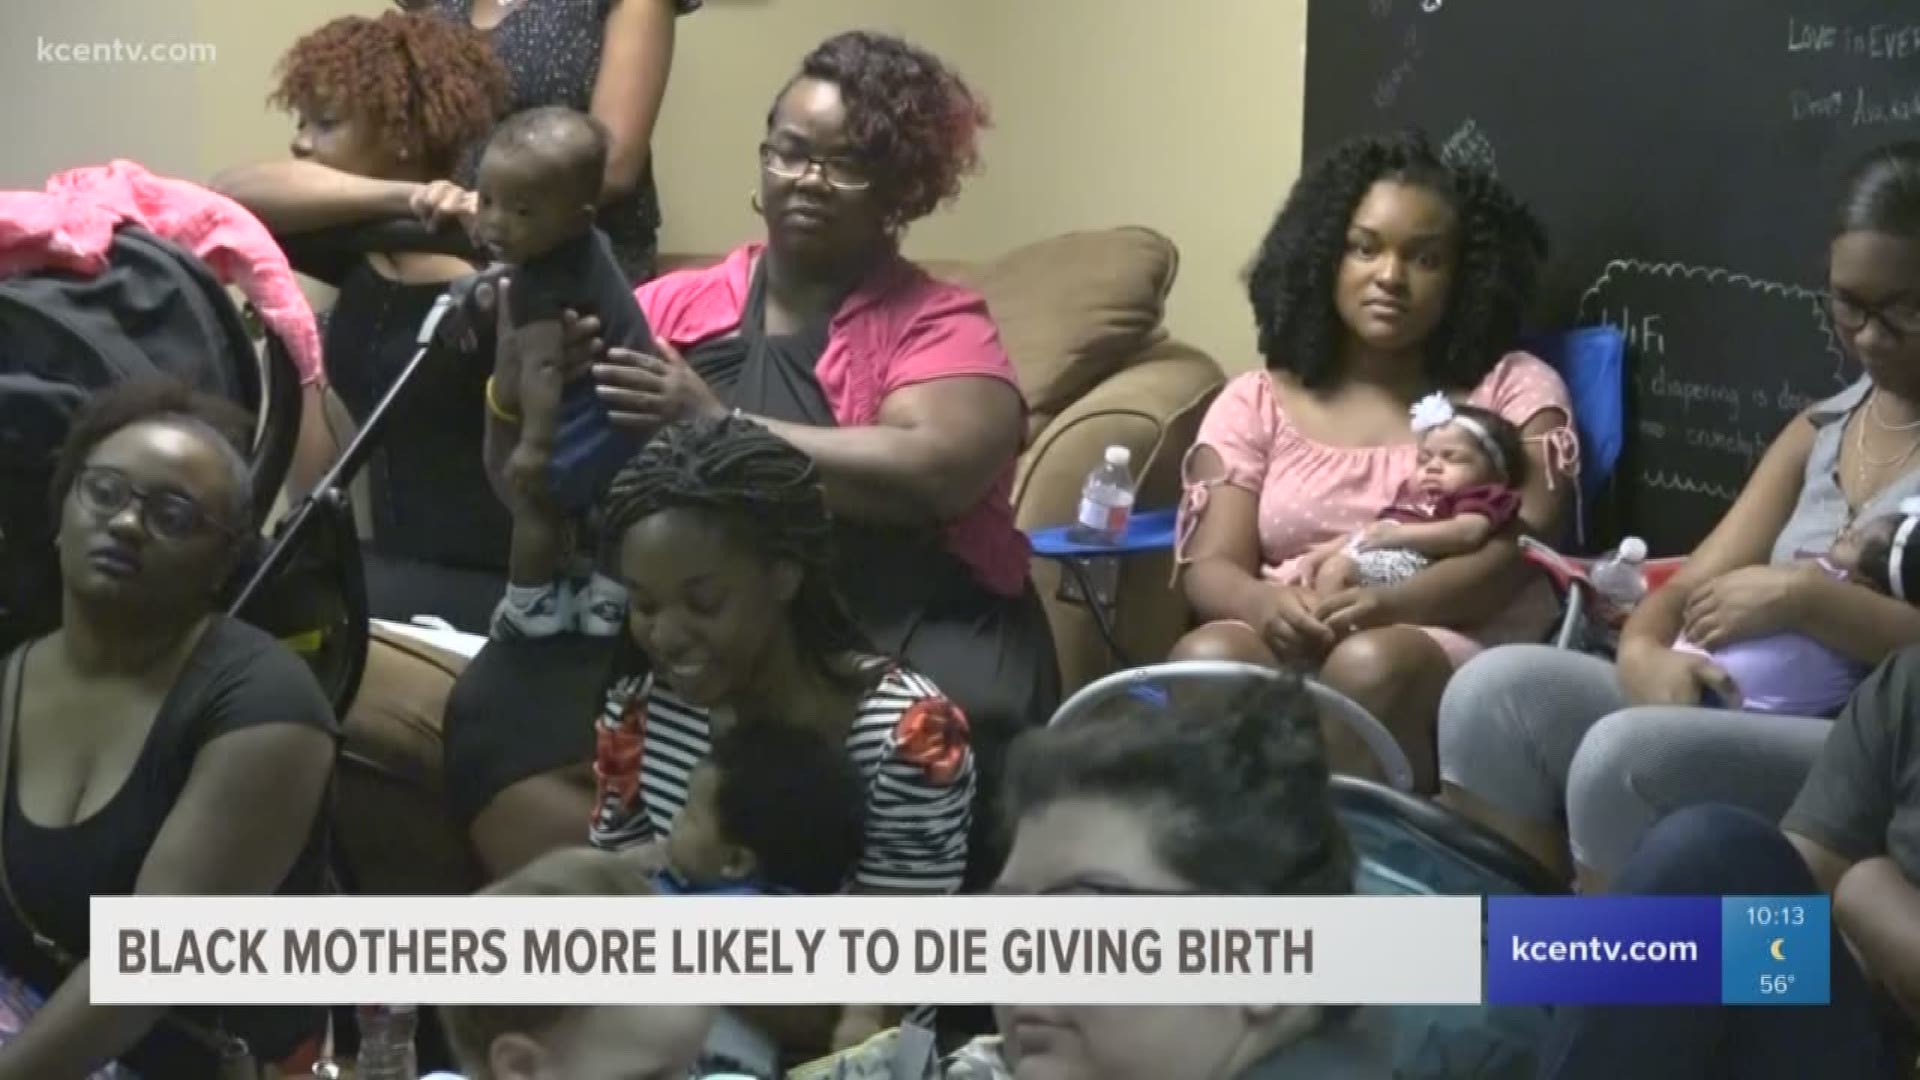 Black mothers more likely to die during childbirth